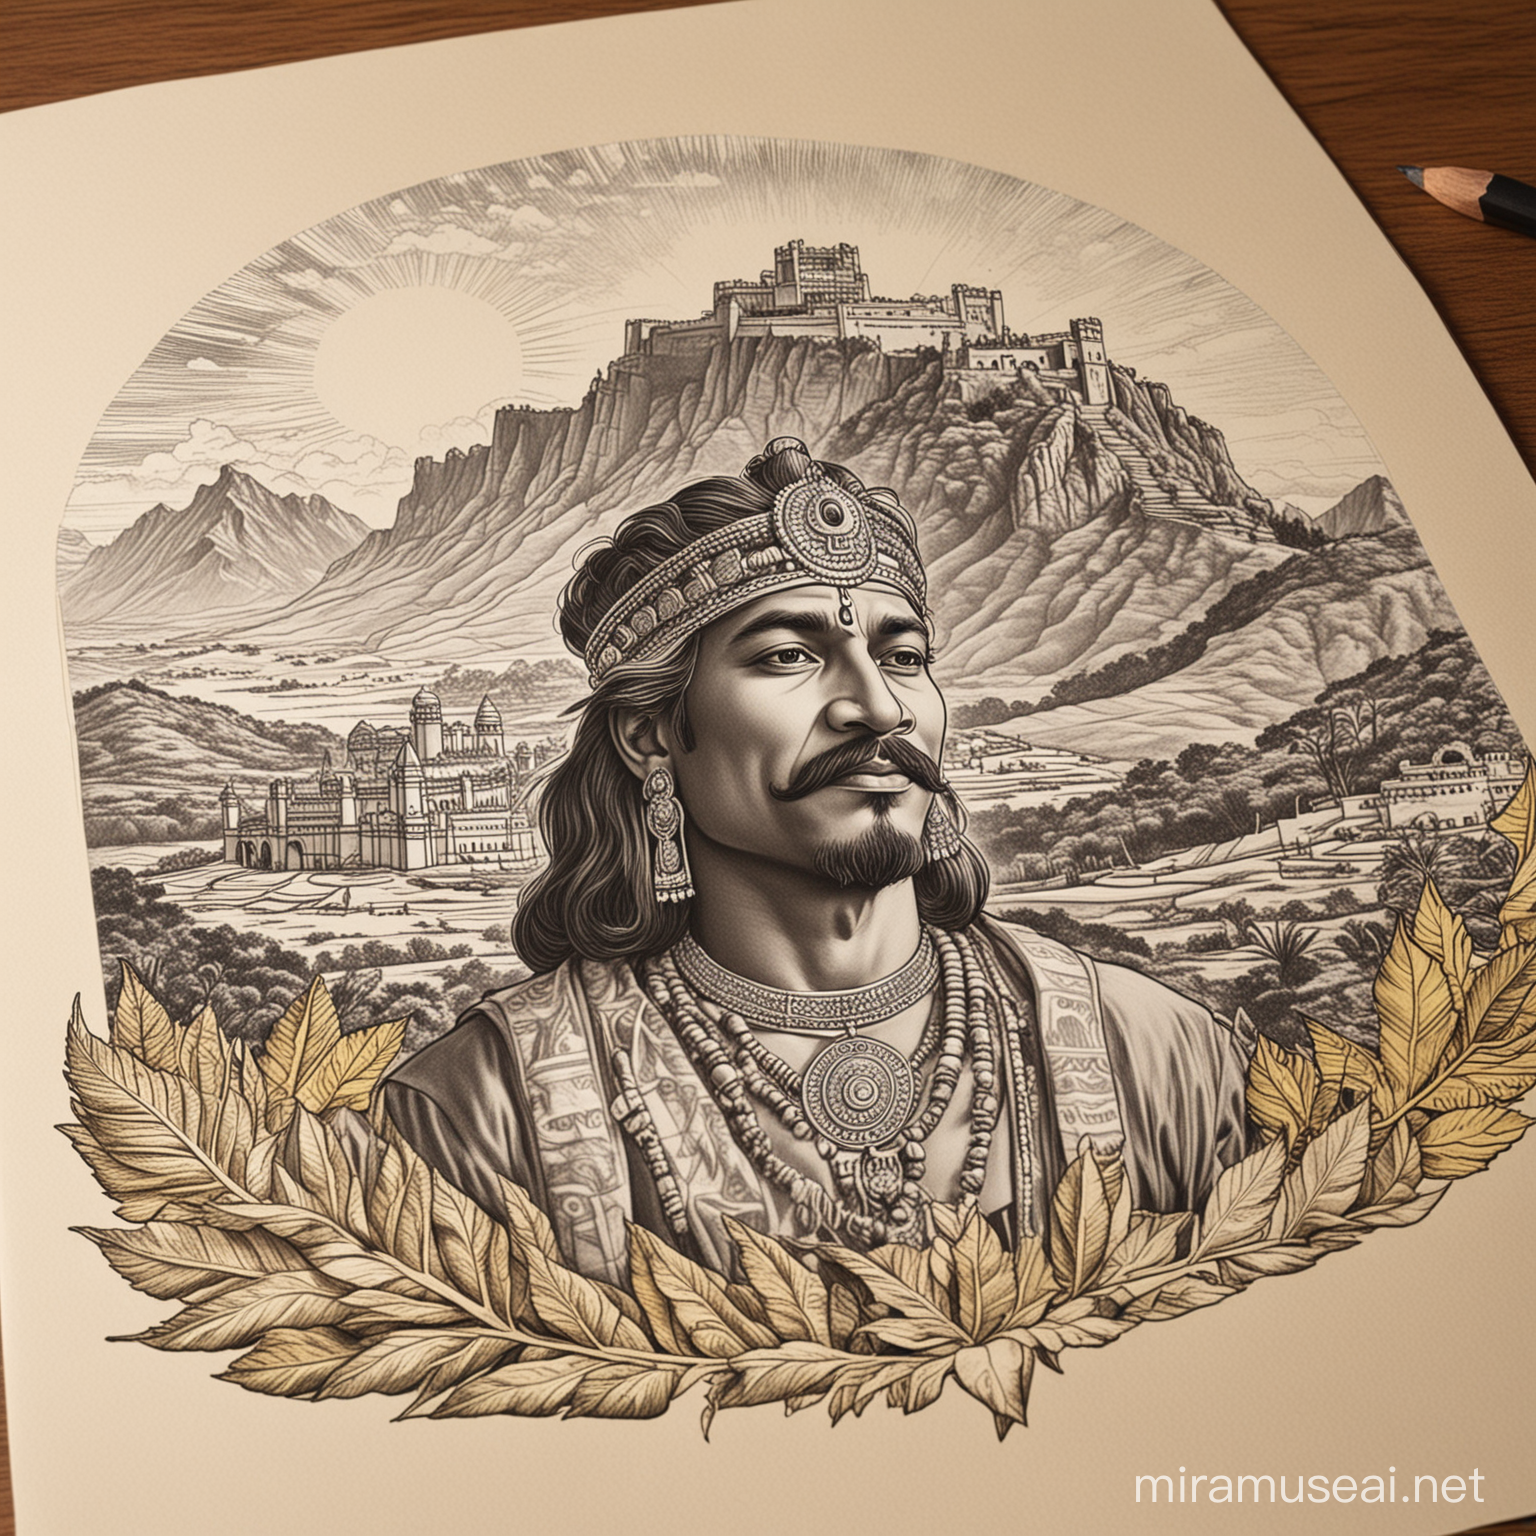 generate a black and white colouring sheet realistic pencil themed logo of a proud majestic indian  king at the centre , surrounded by majestic castles and maui mountains in the backgound, the sun rising in  yellow color in power above , the lines must be a thin golden outline, include thick tobacco leaves at the bottom. this is for my coffee package